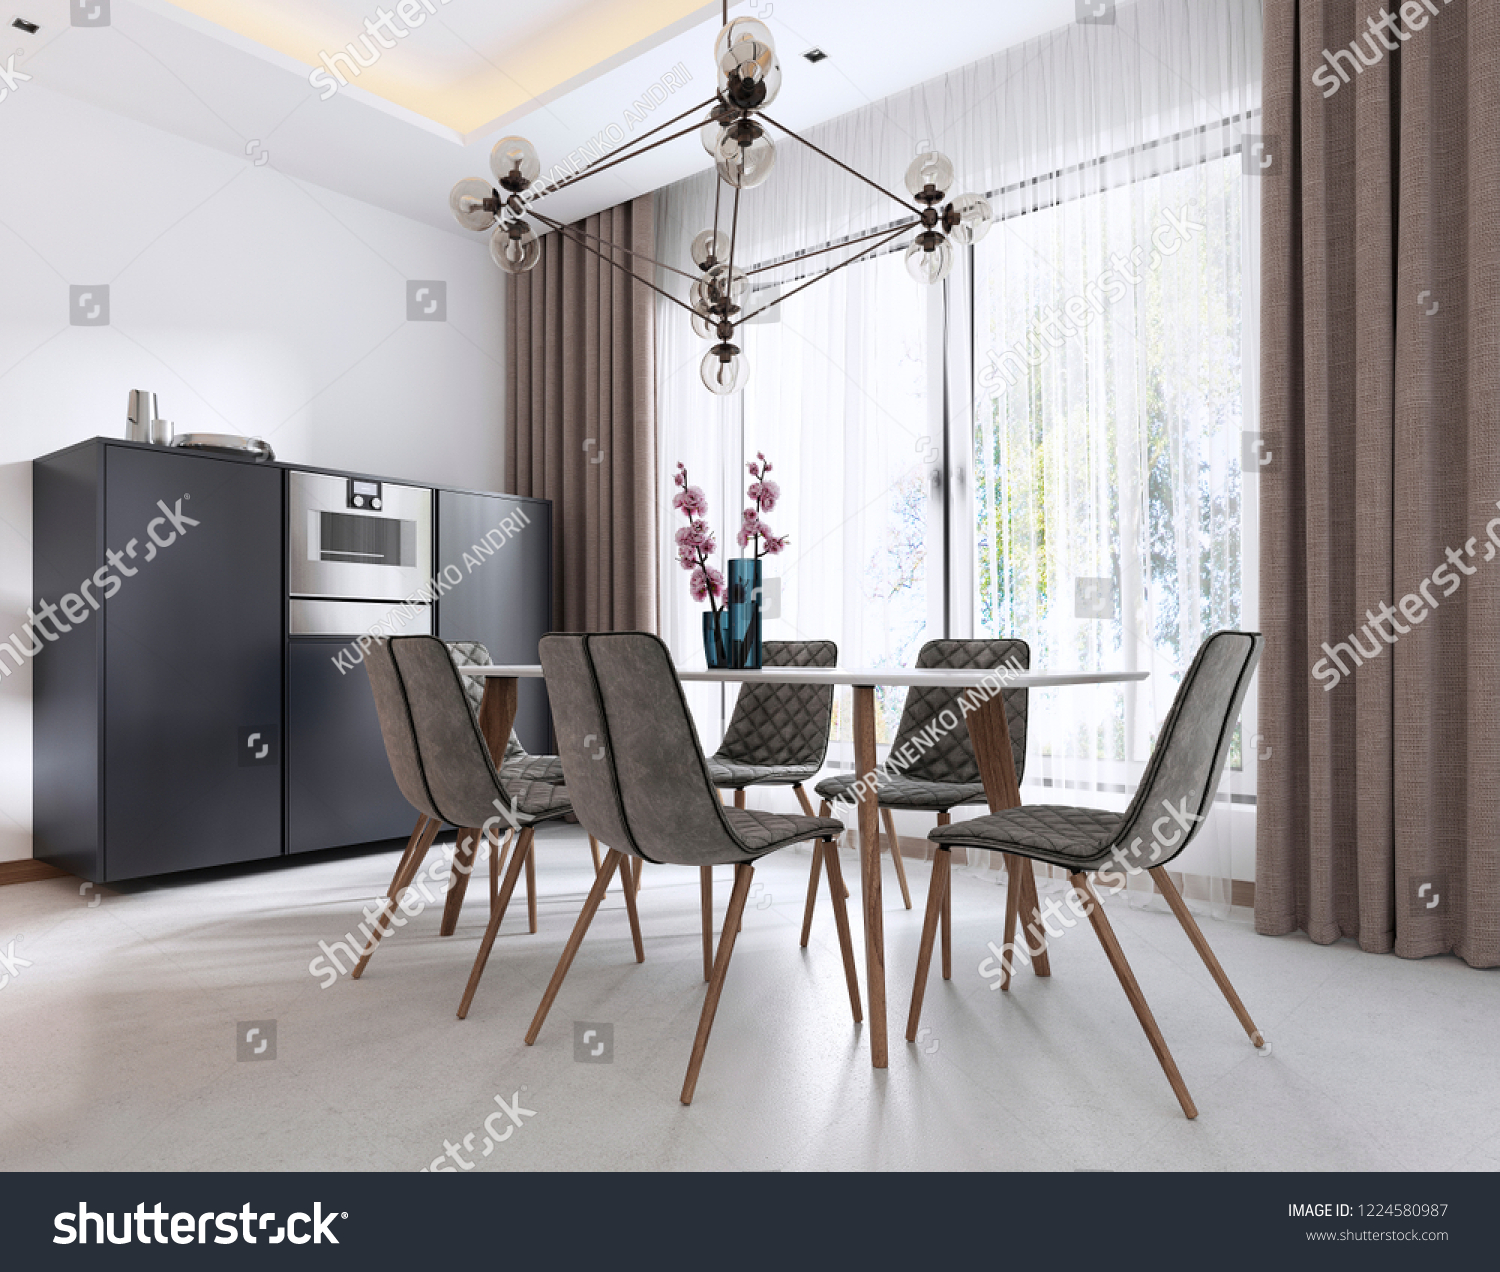 Dining Room Contemporary Style Modern Chairs Stock Illustration 1224580987